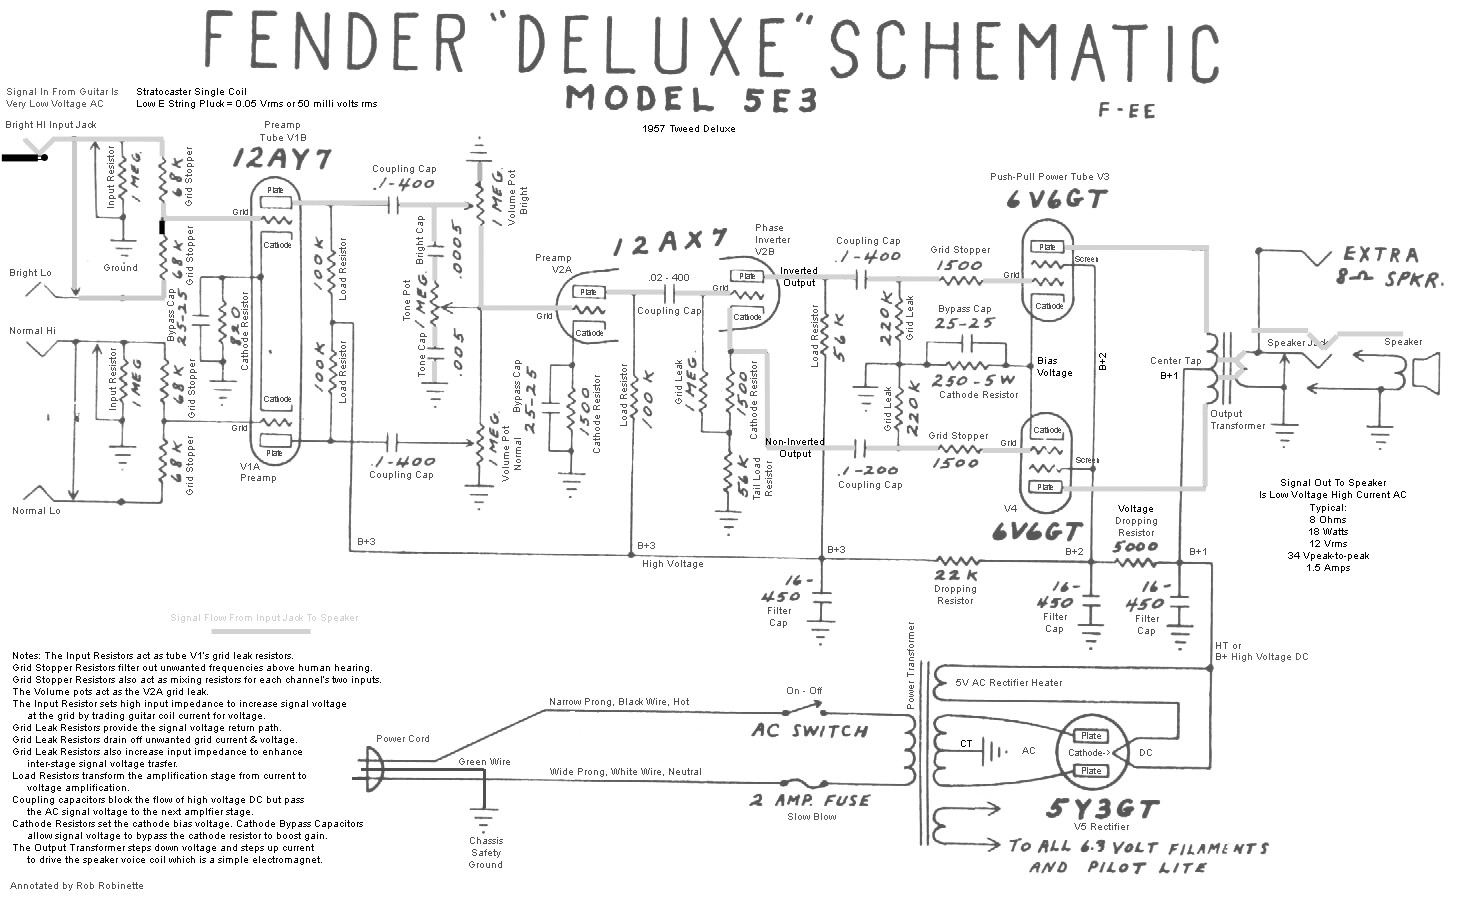 The 5E3 Deluxe Schematic with Signal Flow and Annotations